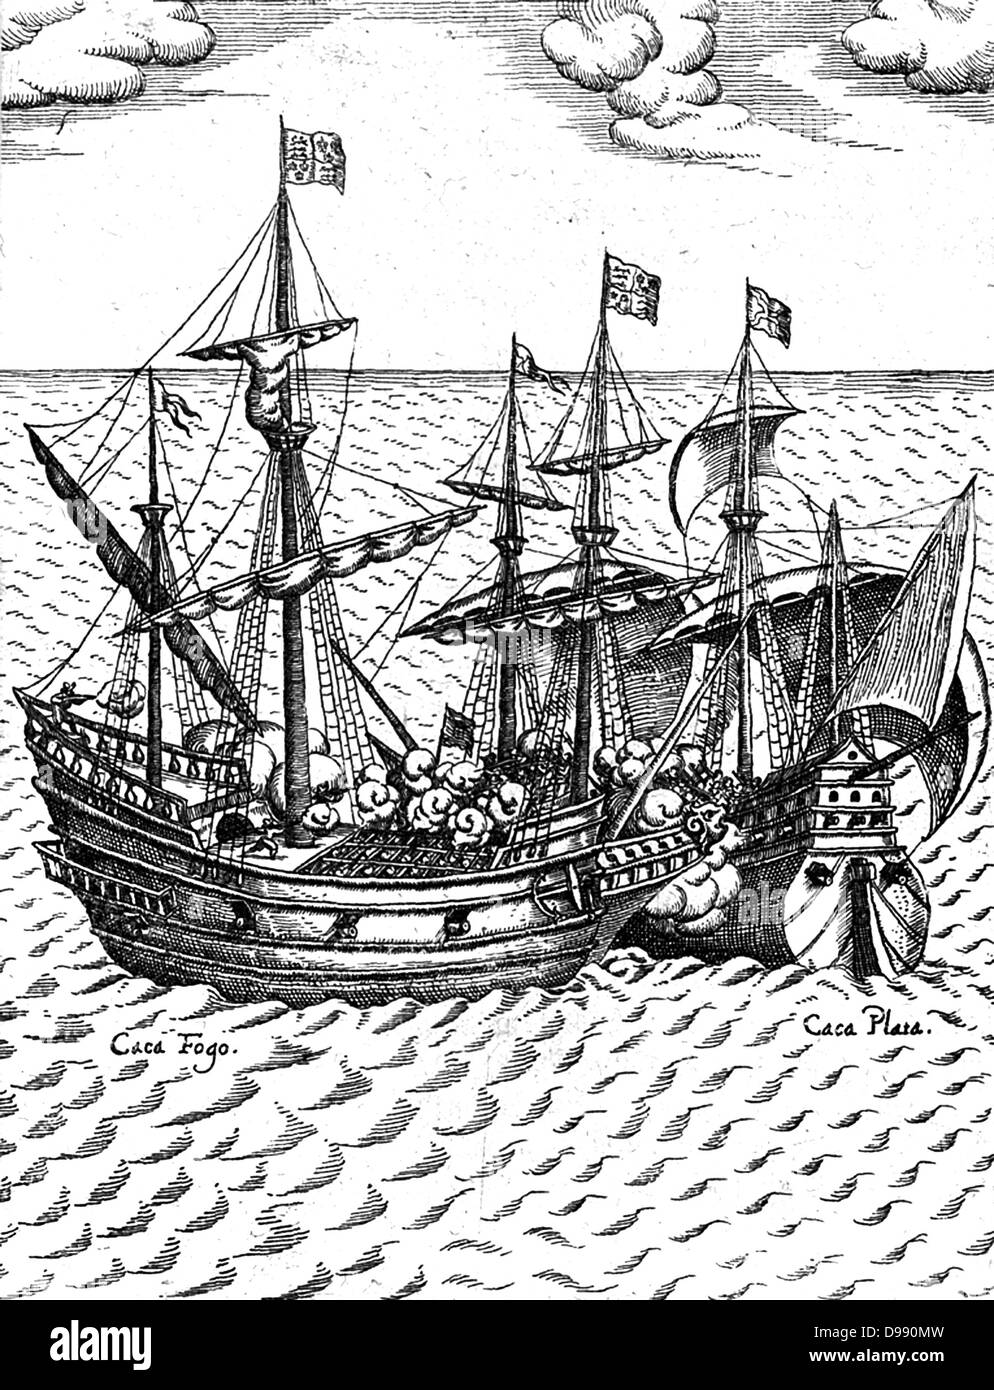 The capture of the Cacafuego, the Spanish treasure-ship, by Sir Francis Drake 1579 in the vicinity of Esmeraldas, Ecuador.  Laden with the treasure from ''Cagafuego'', Golden Hind sailed towards Plymouth, which he reached on September 26, 1580. Stock Photo